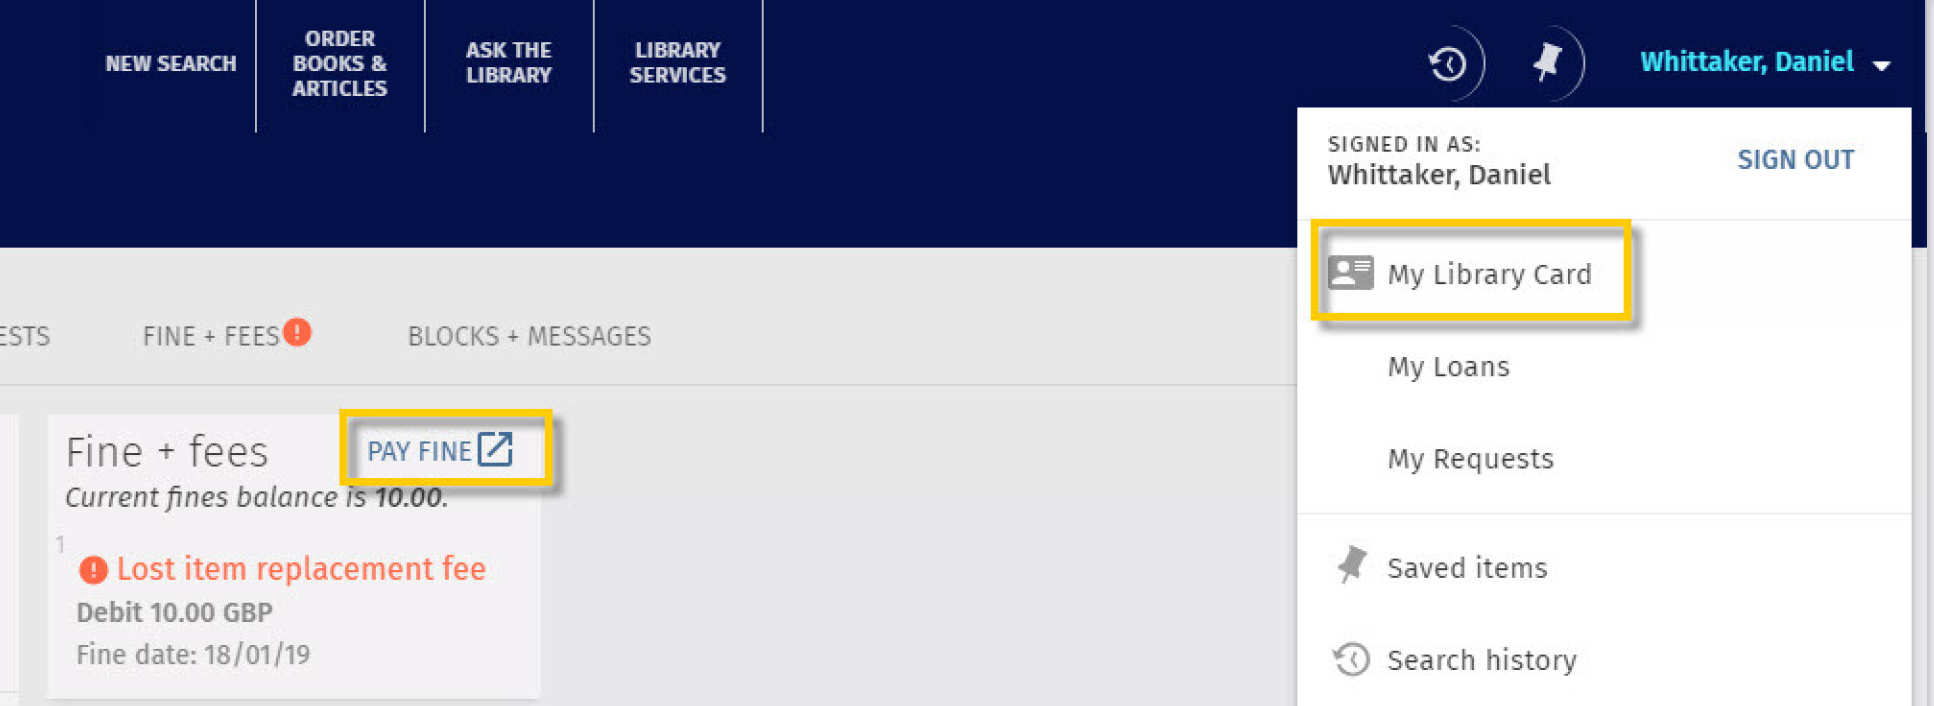 Library search screen showing fines page